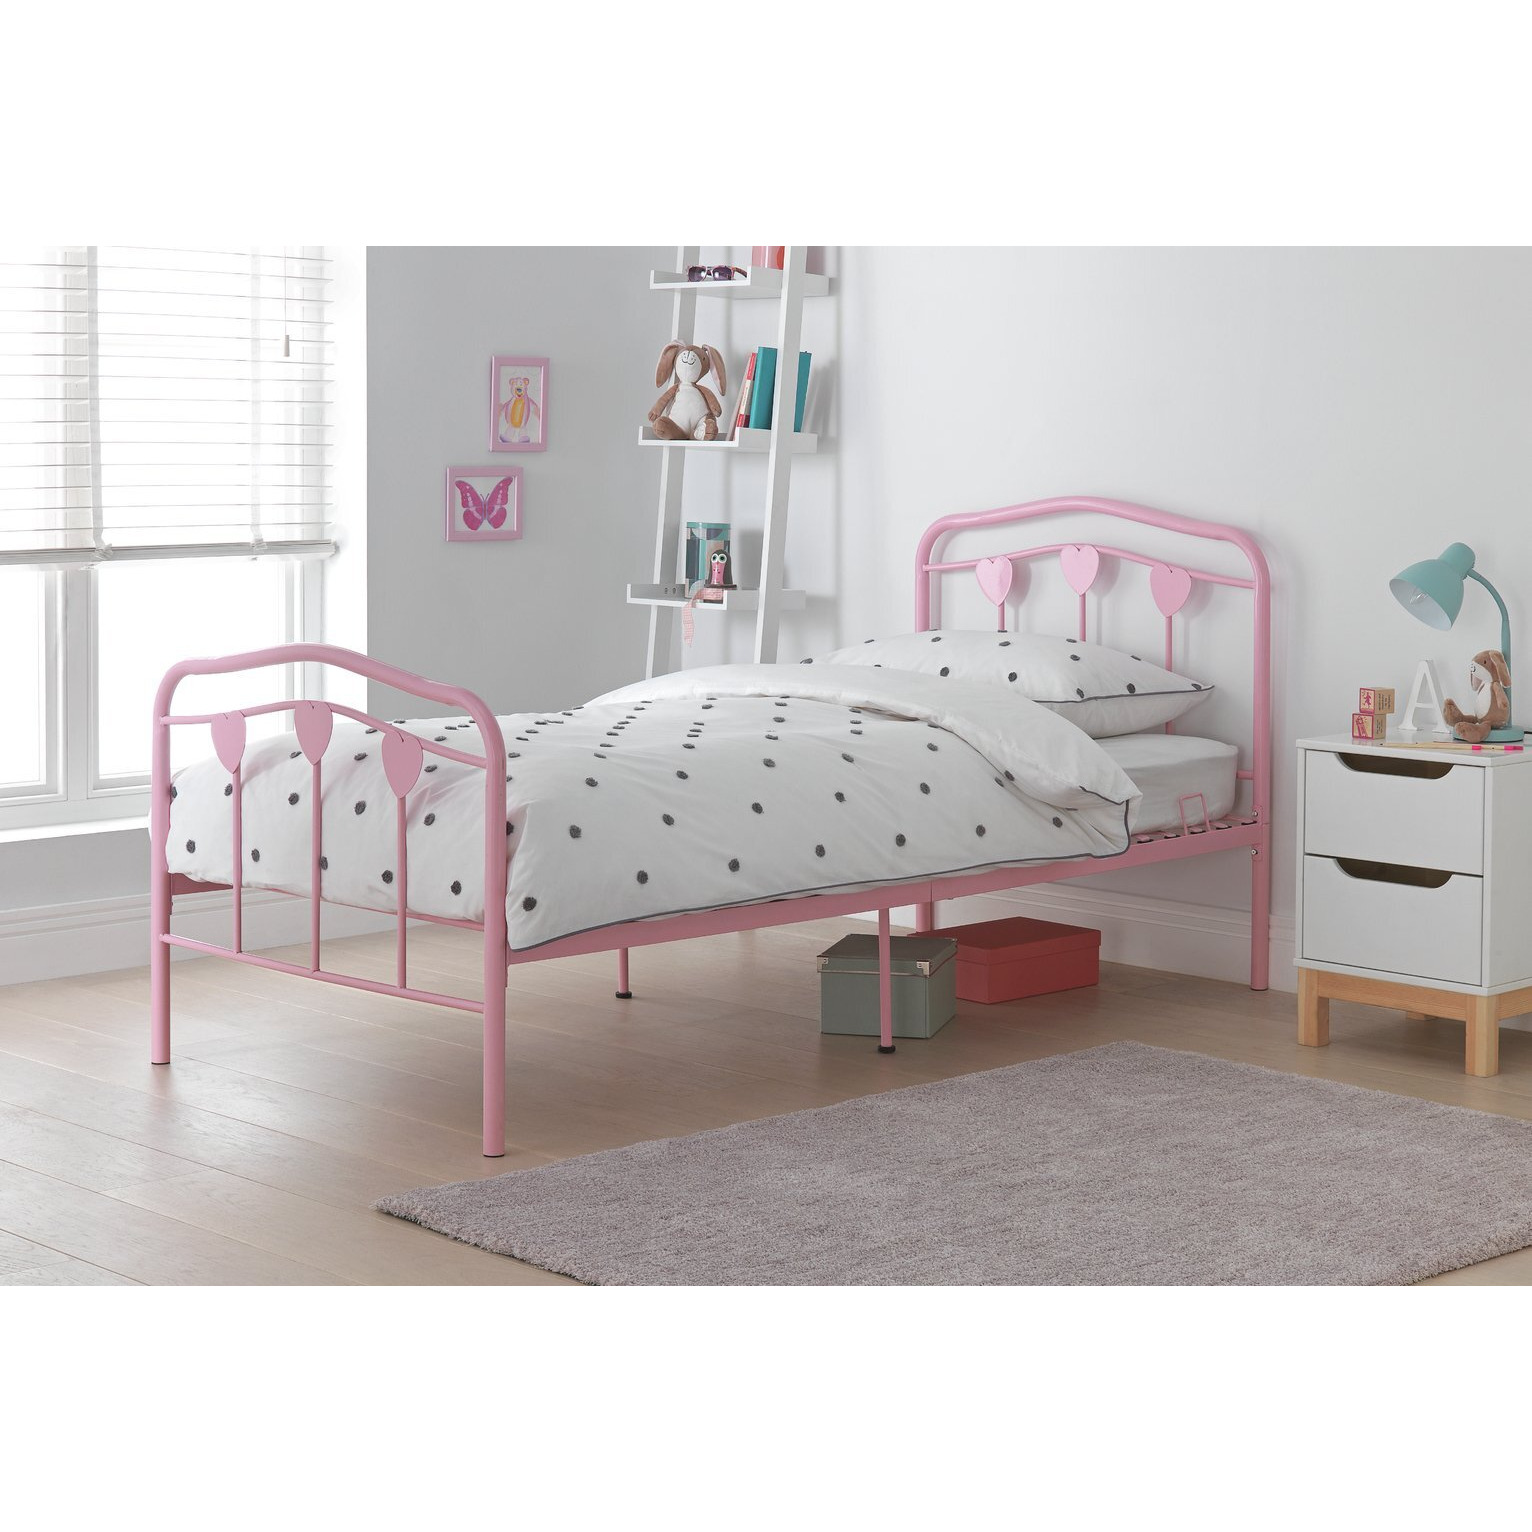 Argos Home Hearts Single Metal Bed Frame - Pink - image 1